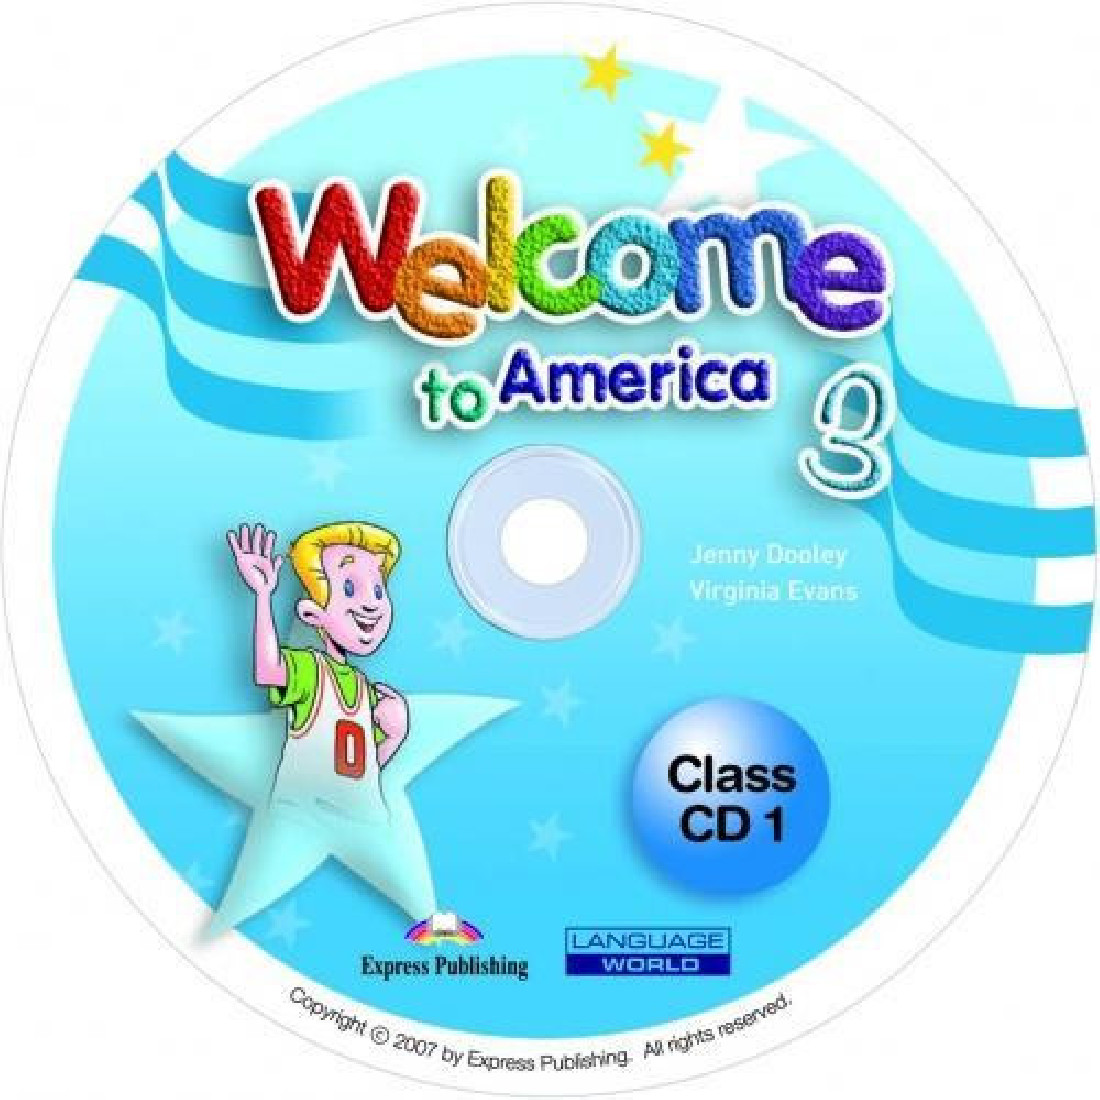 WELCOME TO AMERICA 3 CDs